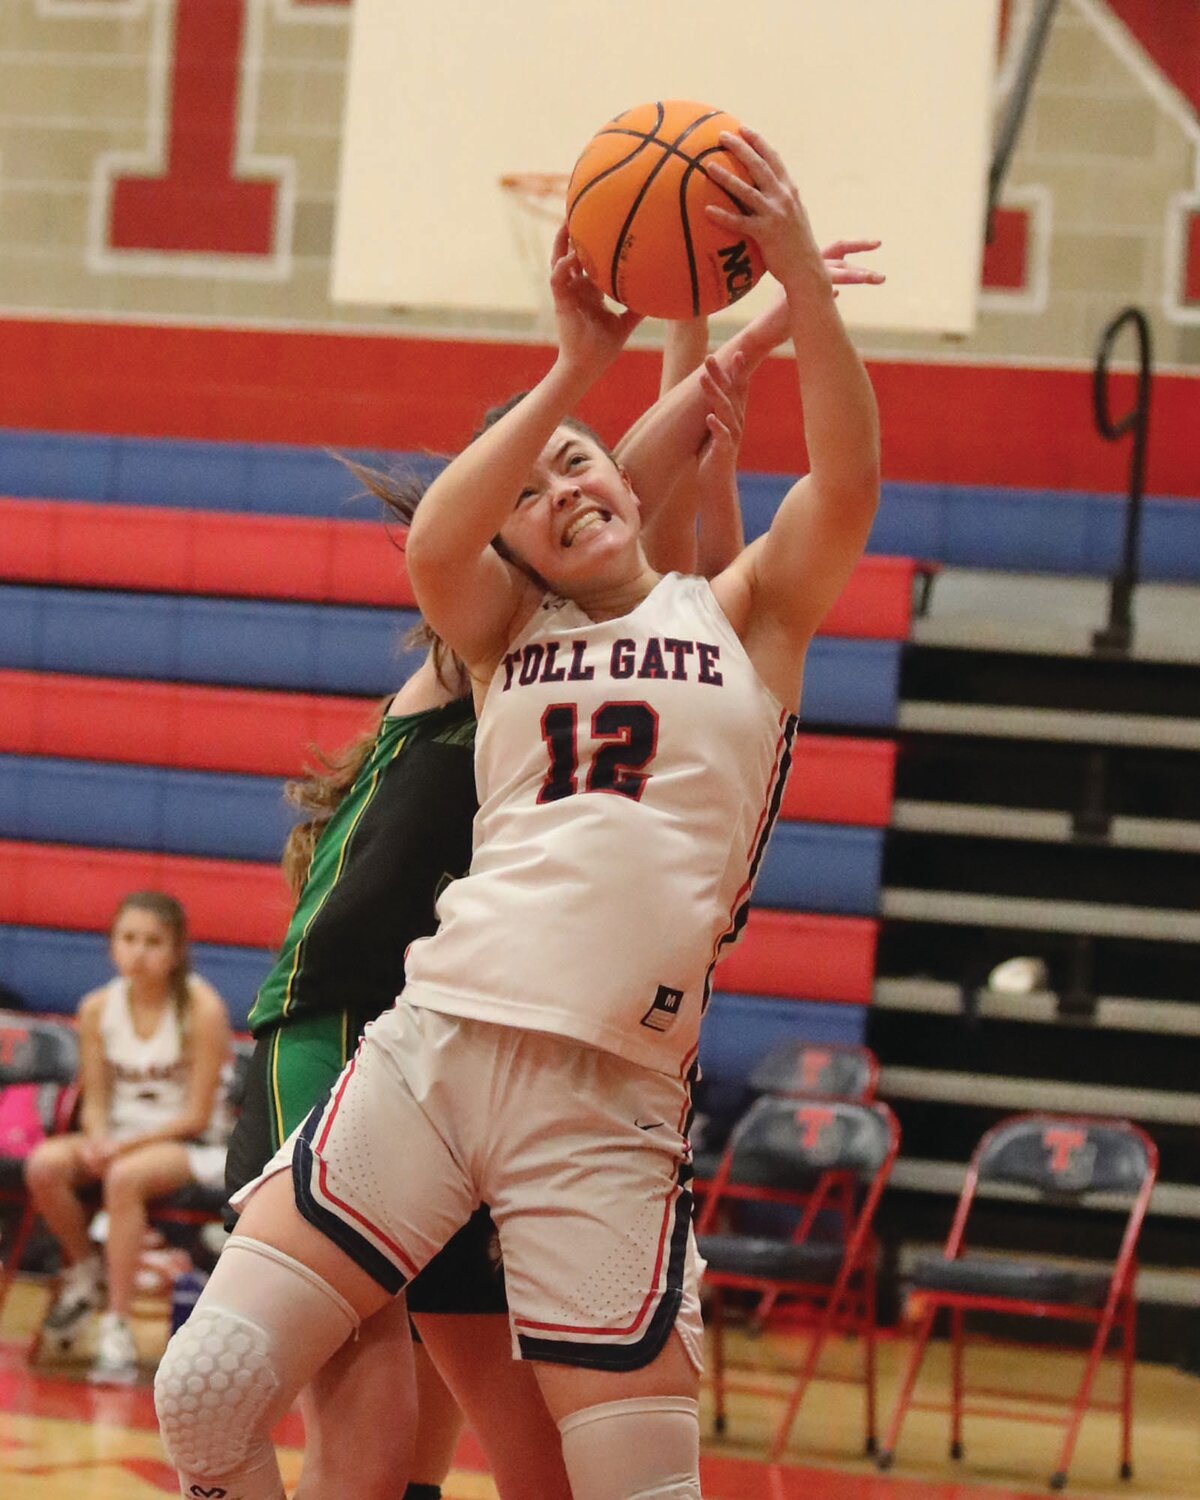 LOOKING TO REBOUND: Toll Gate’s Adeline Areson hauls in a rebound on Monday night. (Photos by Mike Zawistoski)